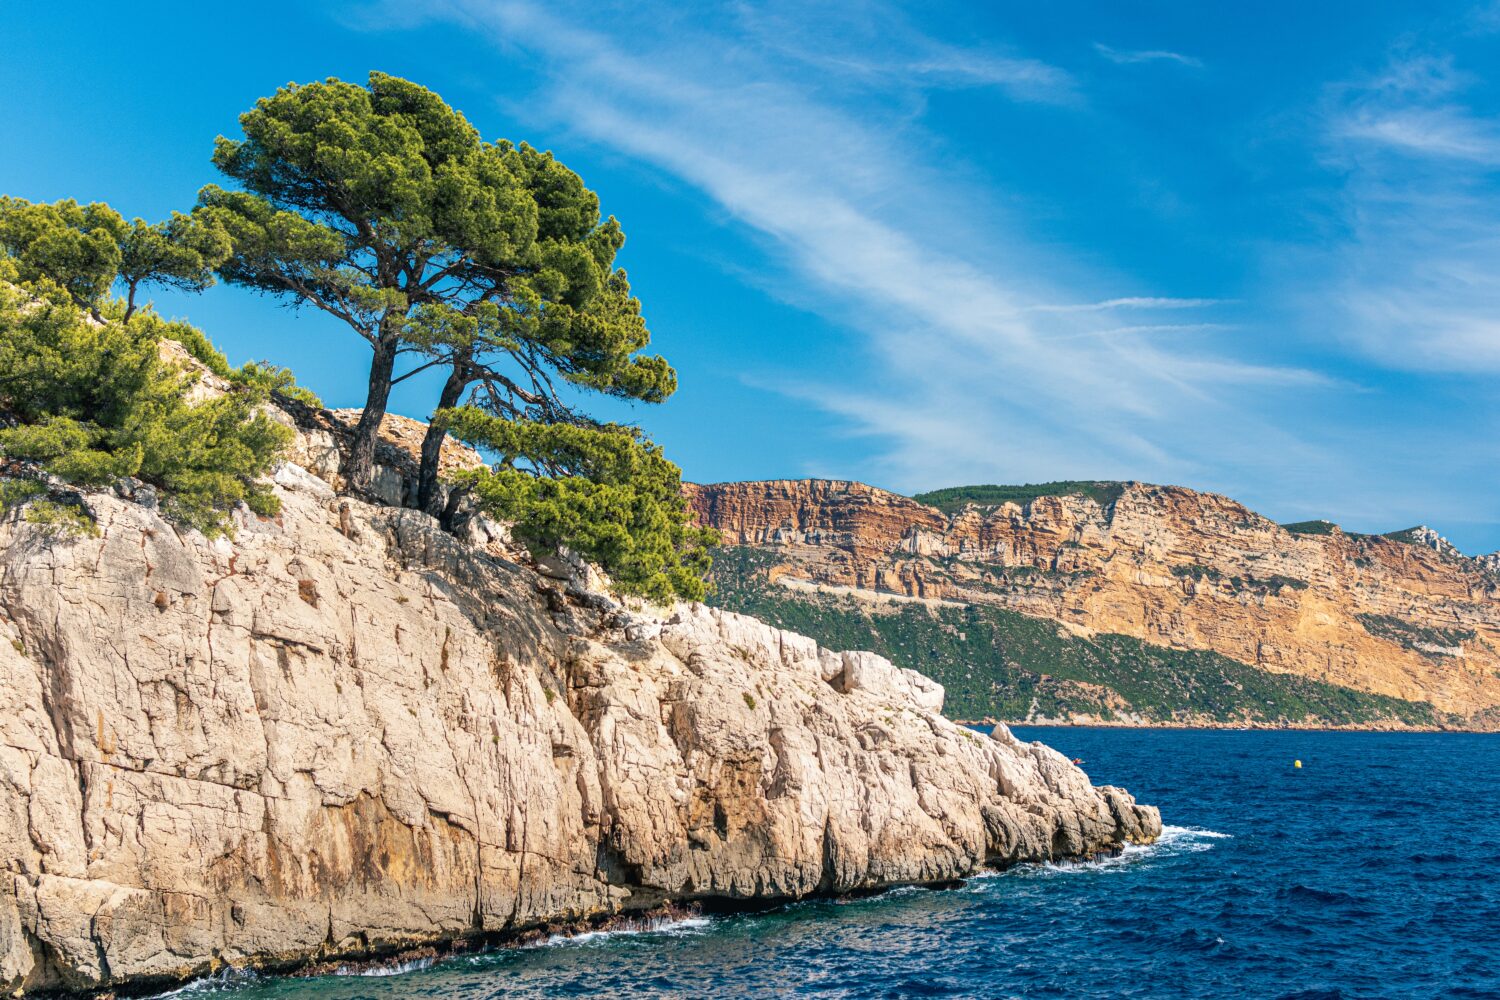 Calanques marseille view by the sea | Gentle provence